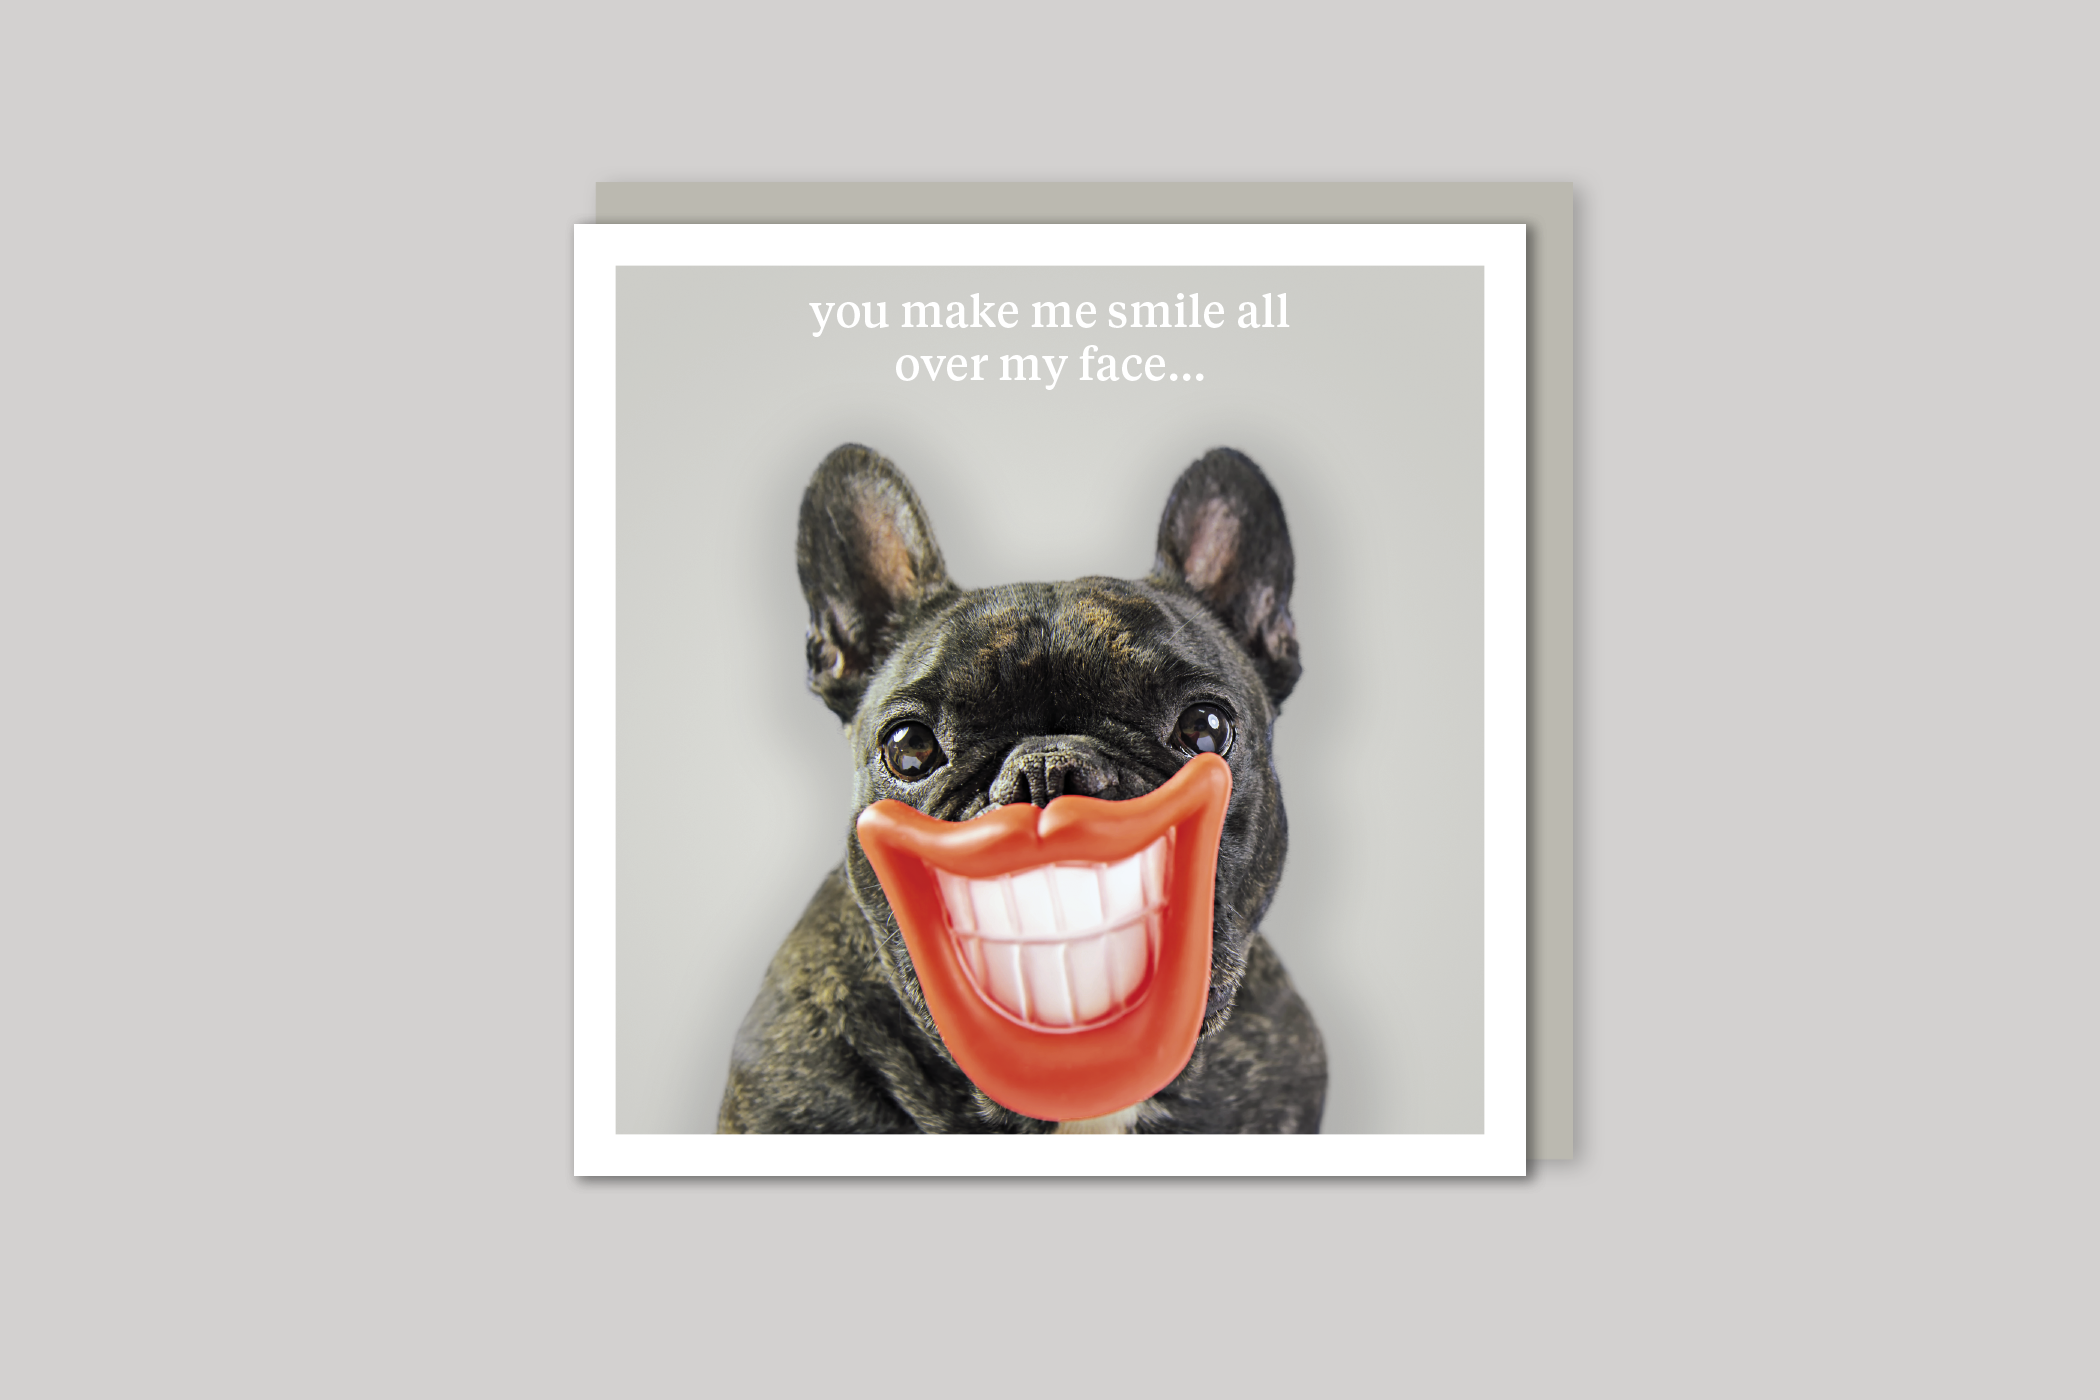 Smiling All Over My Face quirky animal portrait from Curious World range of greeting cards by Icon, back page.